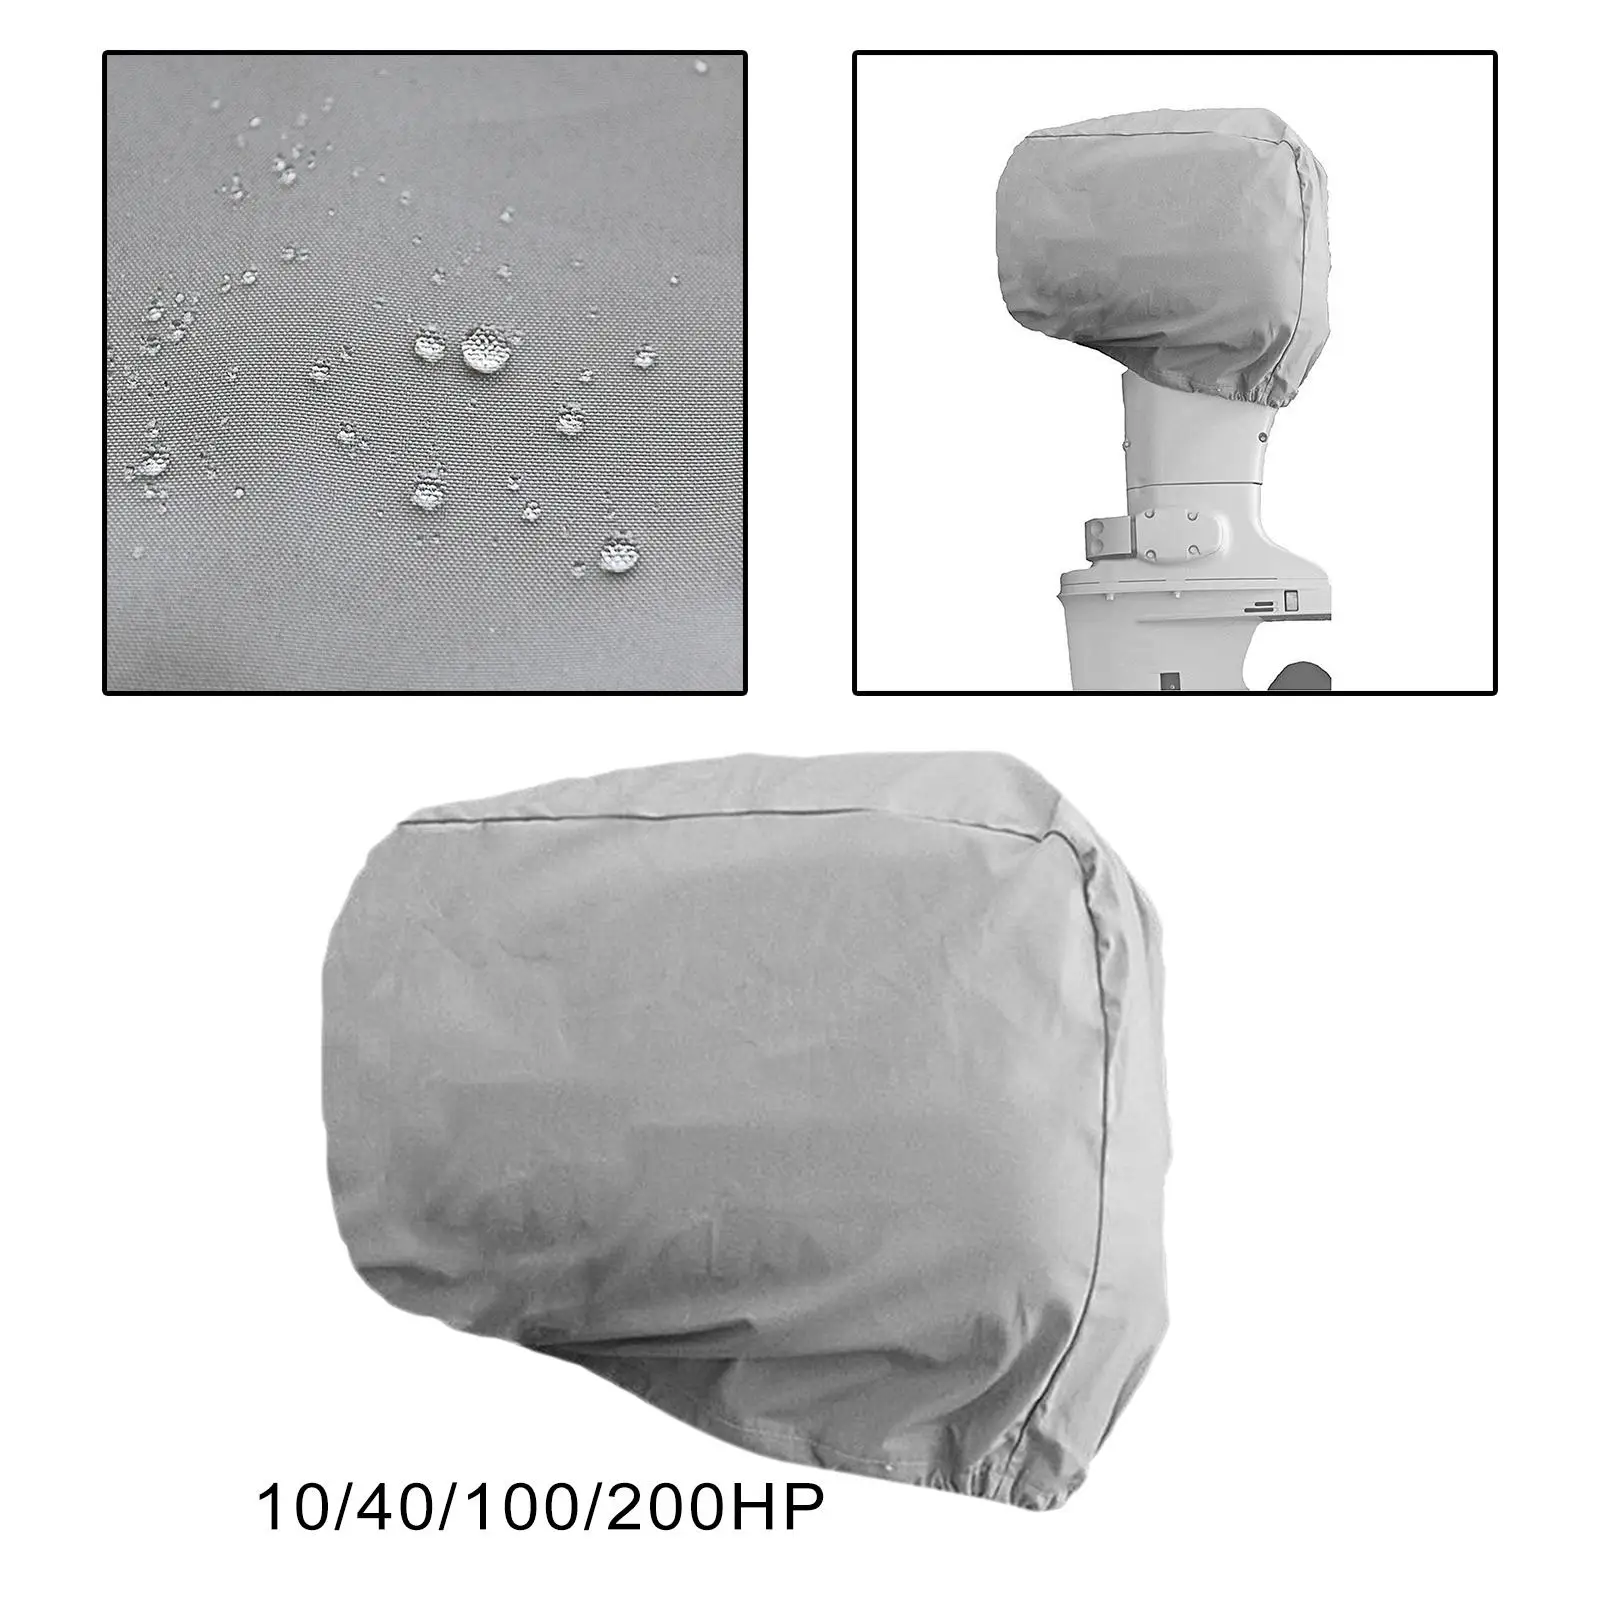 Boat Hood Covers Dust Proof Oxford Outboard Motor Cover for Boating Fishing